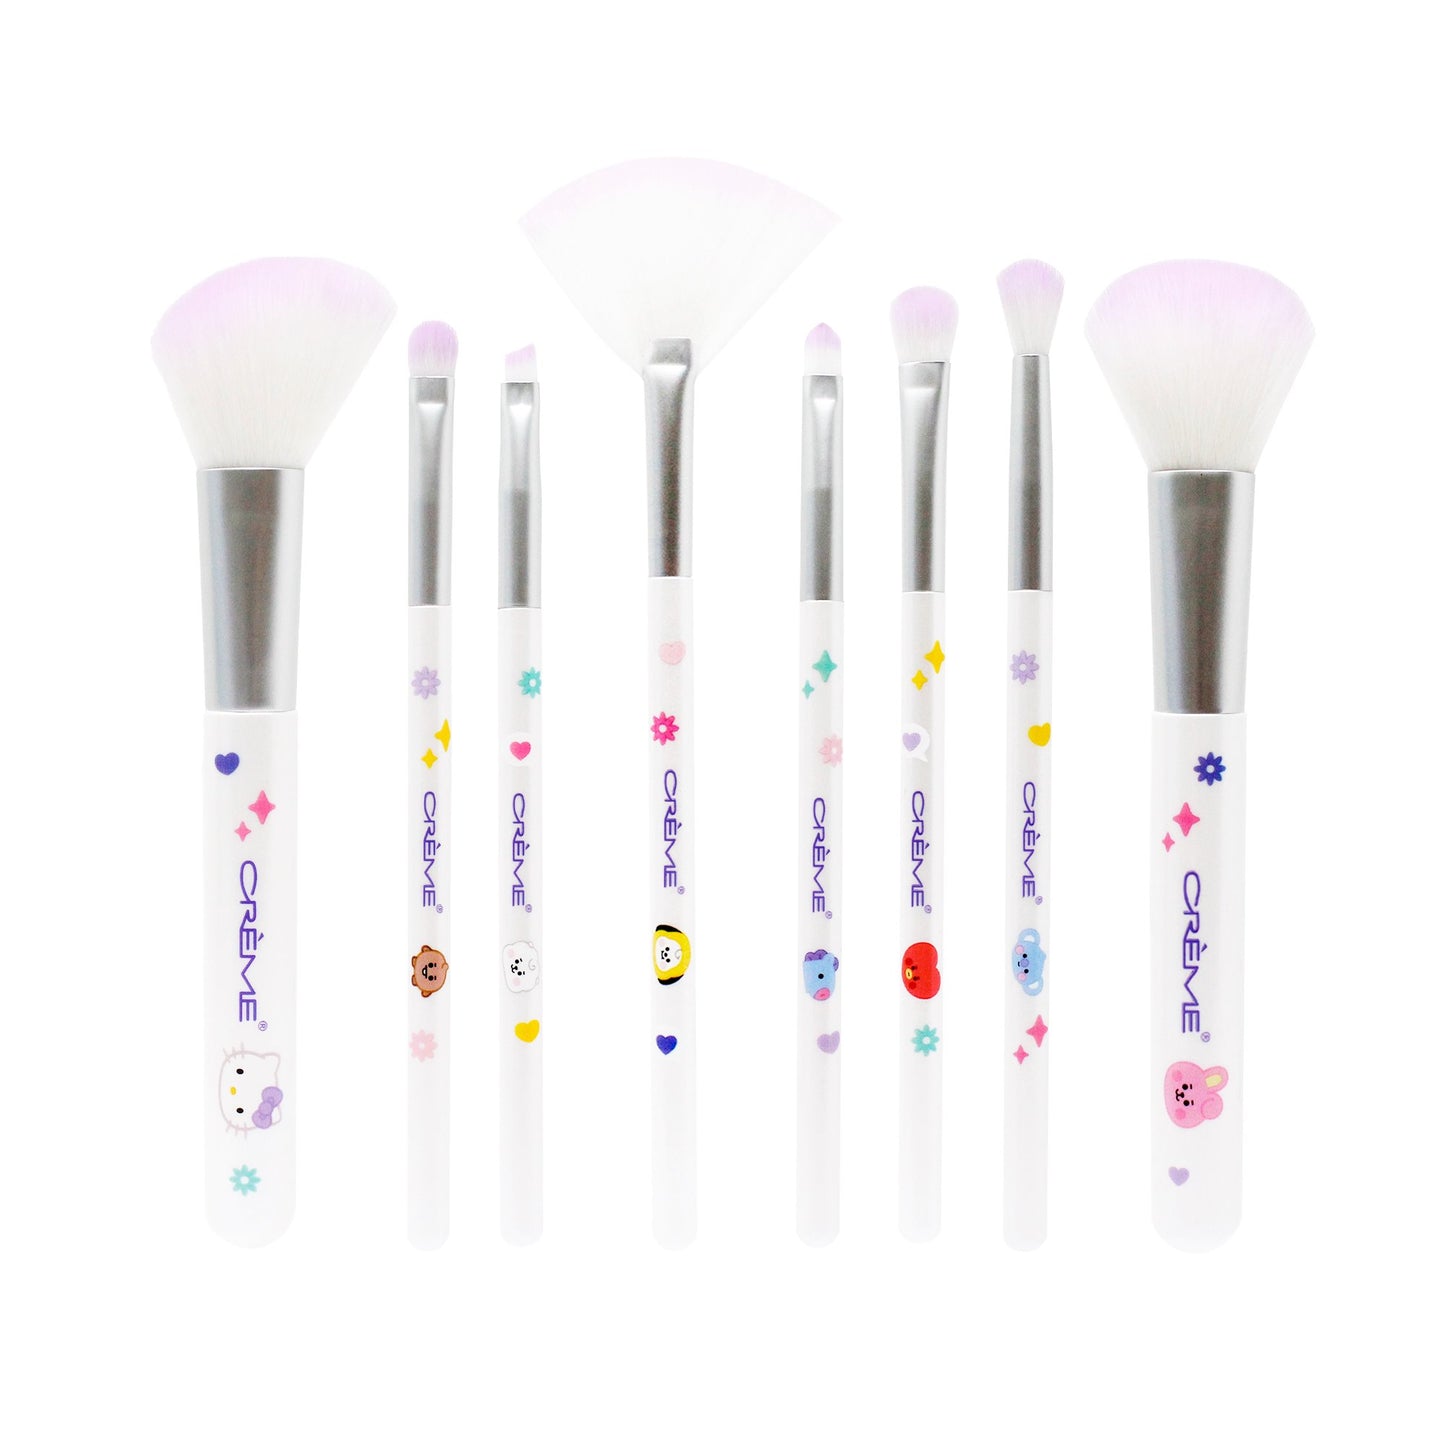 The Crème Shop: Hello Kitty & BT21 Essential Collection - Brush Set